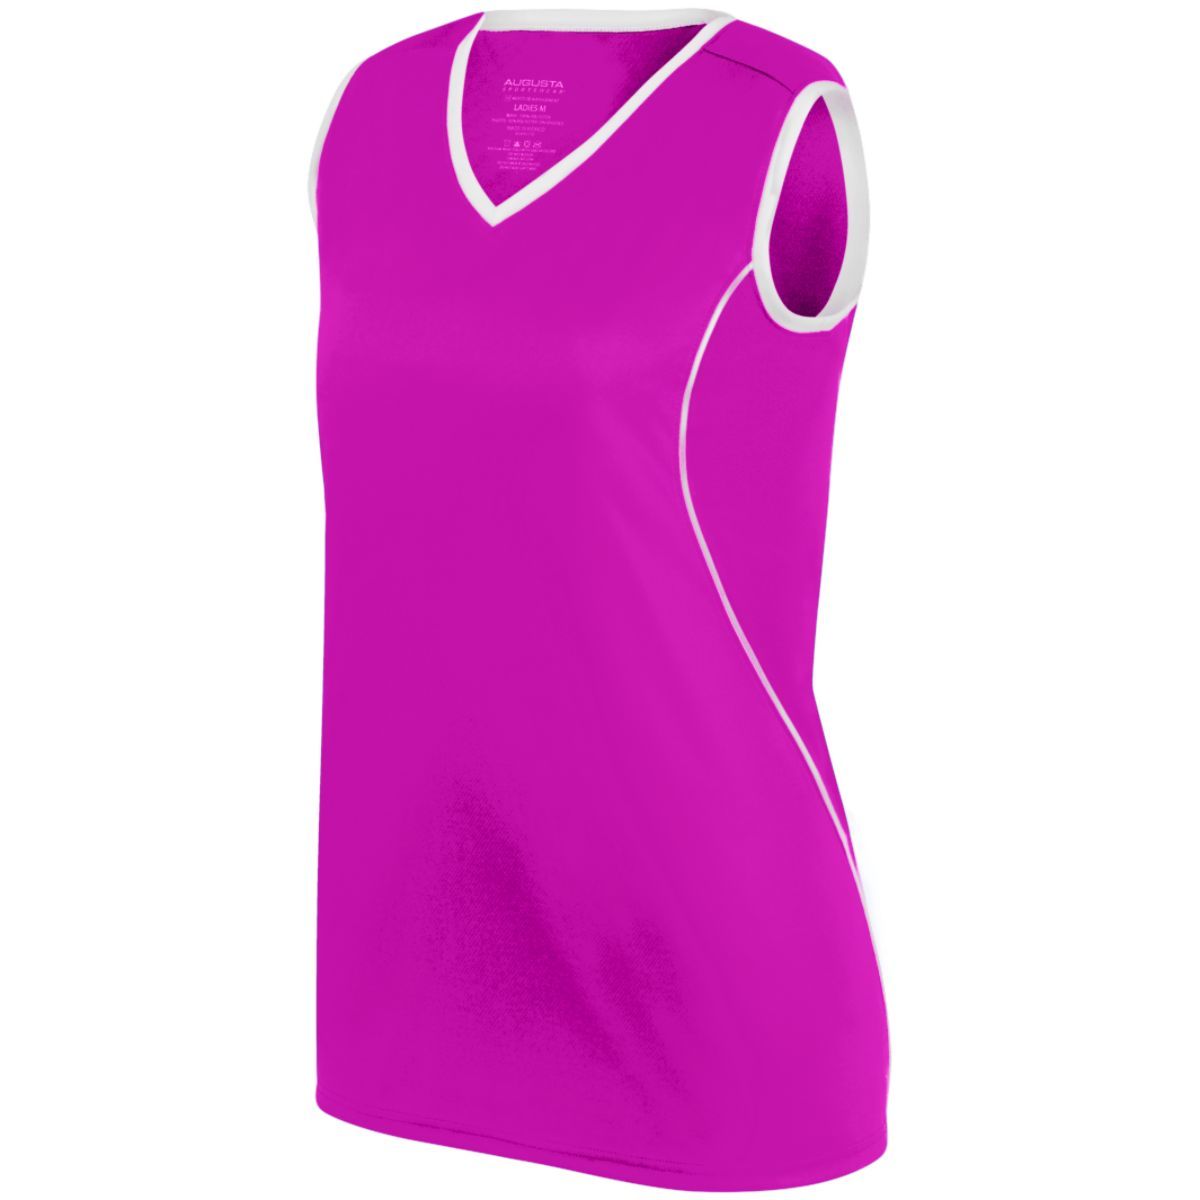 Augusta Sportswear Girls Firebolt Jersey in Power Pink/White  -Part of the Girls, Augusta-Products, Softball, Girls-Jersey, Shirts product lines at KanaleyCreations.com